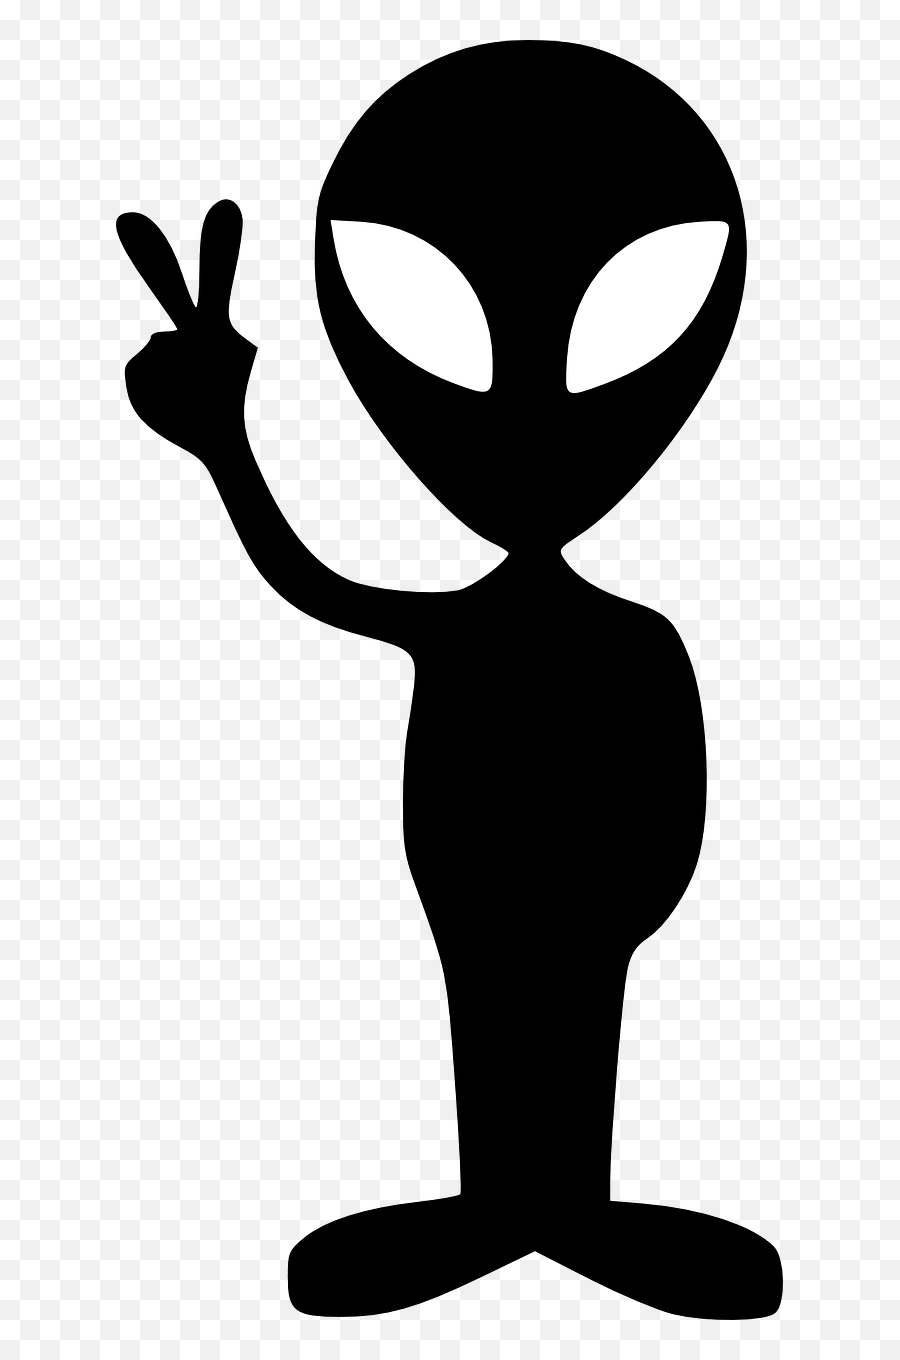 Free Alien Clipart Black And White Download Free Alien Emoji,Printable Alien Emoji